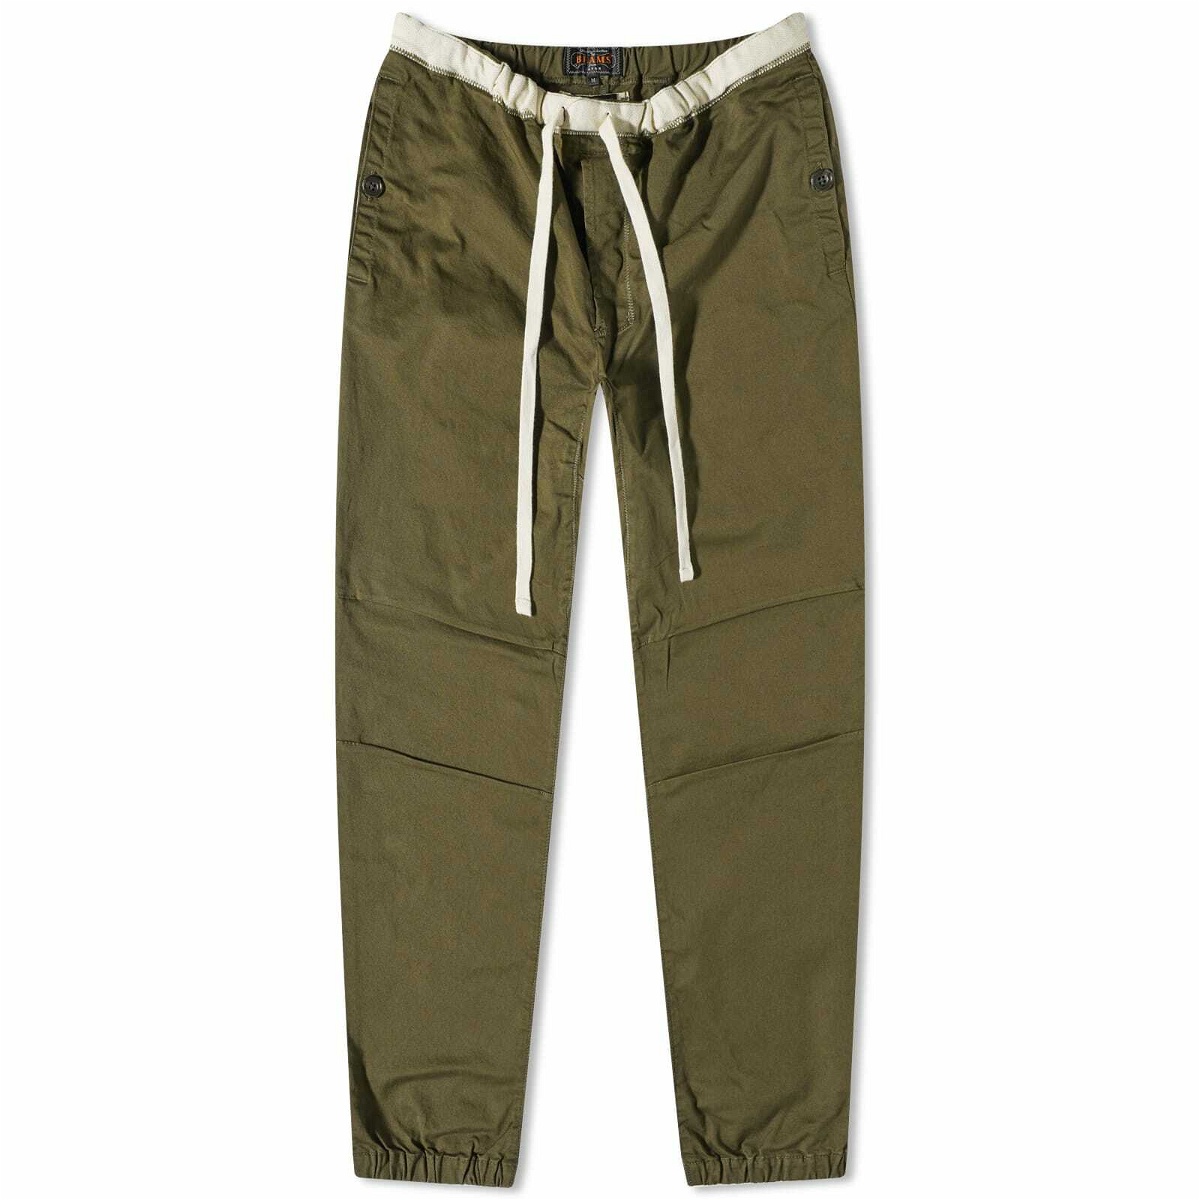 Photo: Beams Plus Men's Twill Gym Pant in Olive